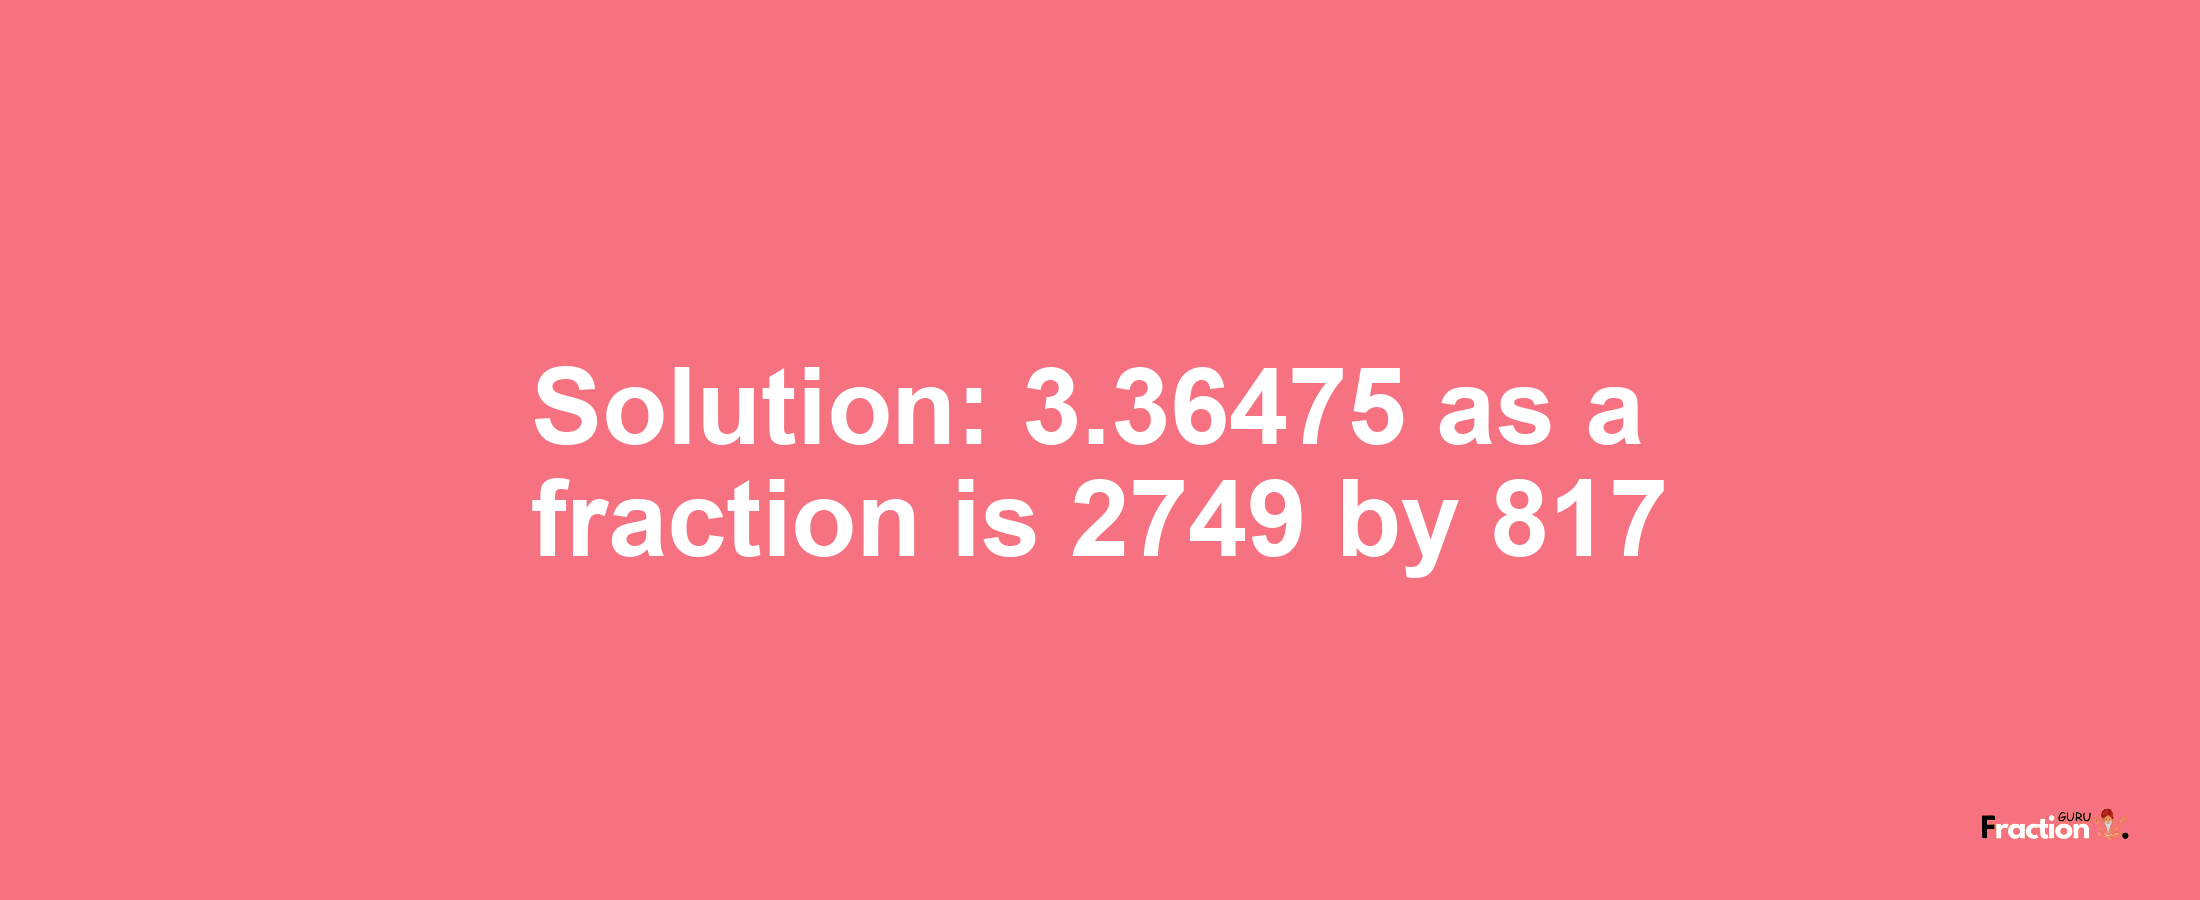 Solution:3.36475 as a fraction is 2749/817